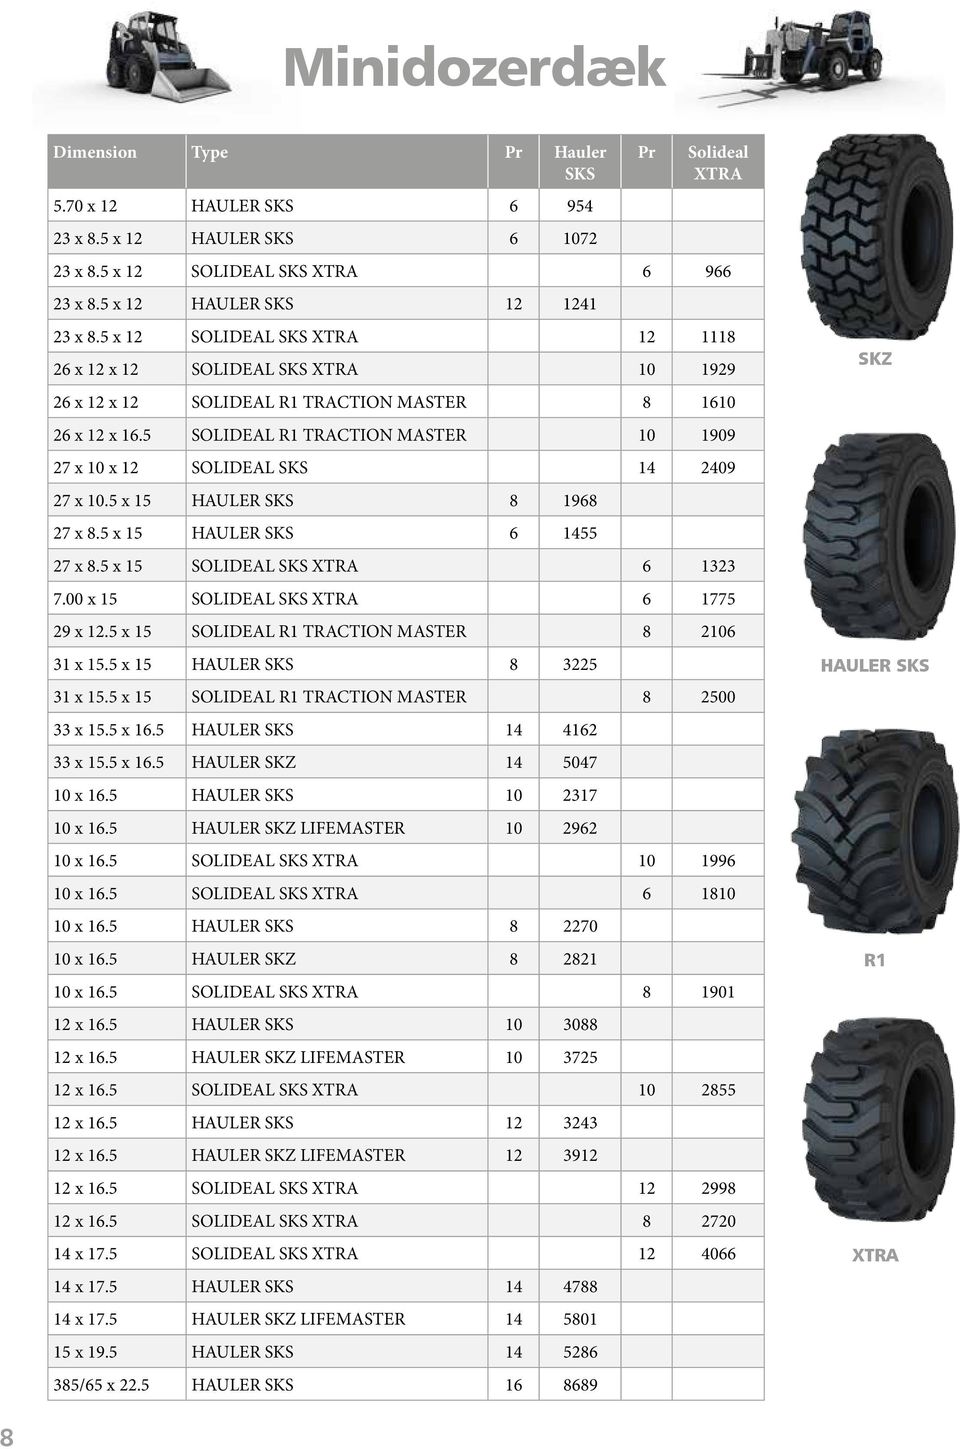 5 SOLIDEAL R1 TRACTION MASTER 10 1909 27 x 10 x 12 SOLIDEAL SKS 14 2409 27 x 10.5 x 15 HAULER SKS 8 1968 27 x 8.5 x 15 HAULER SKS 6 1455 27 x 8.5 x 15 SOLIDEAL SKS XTRA 6 1323 7.